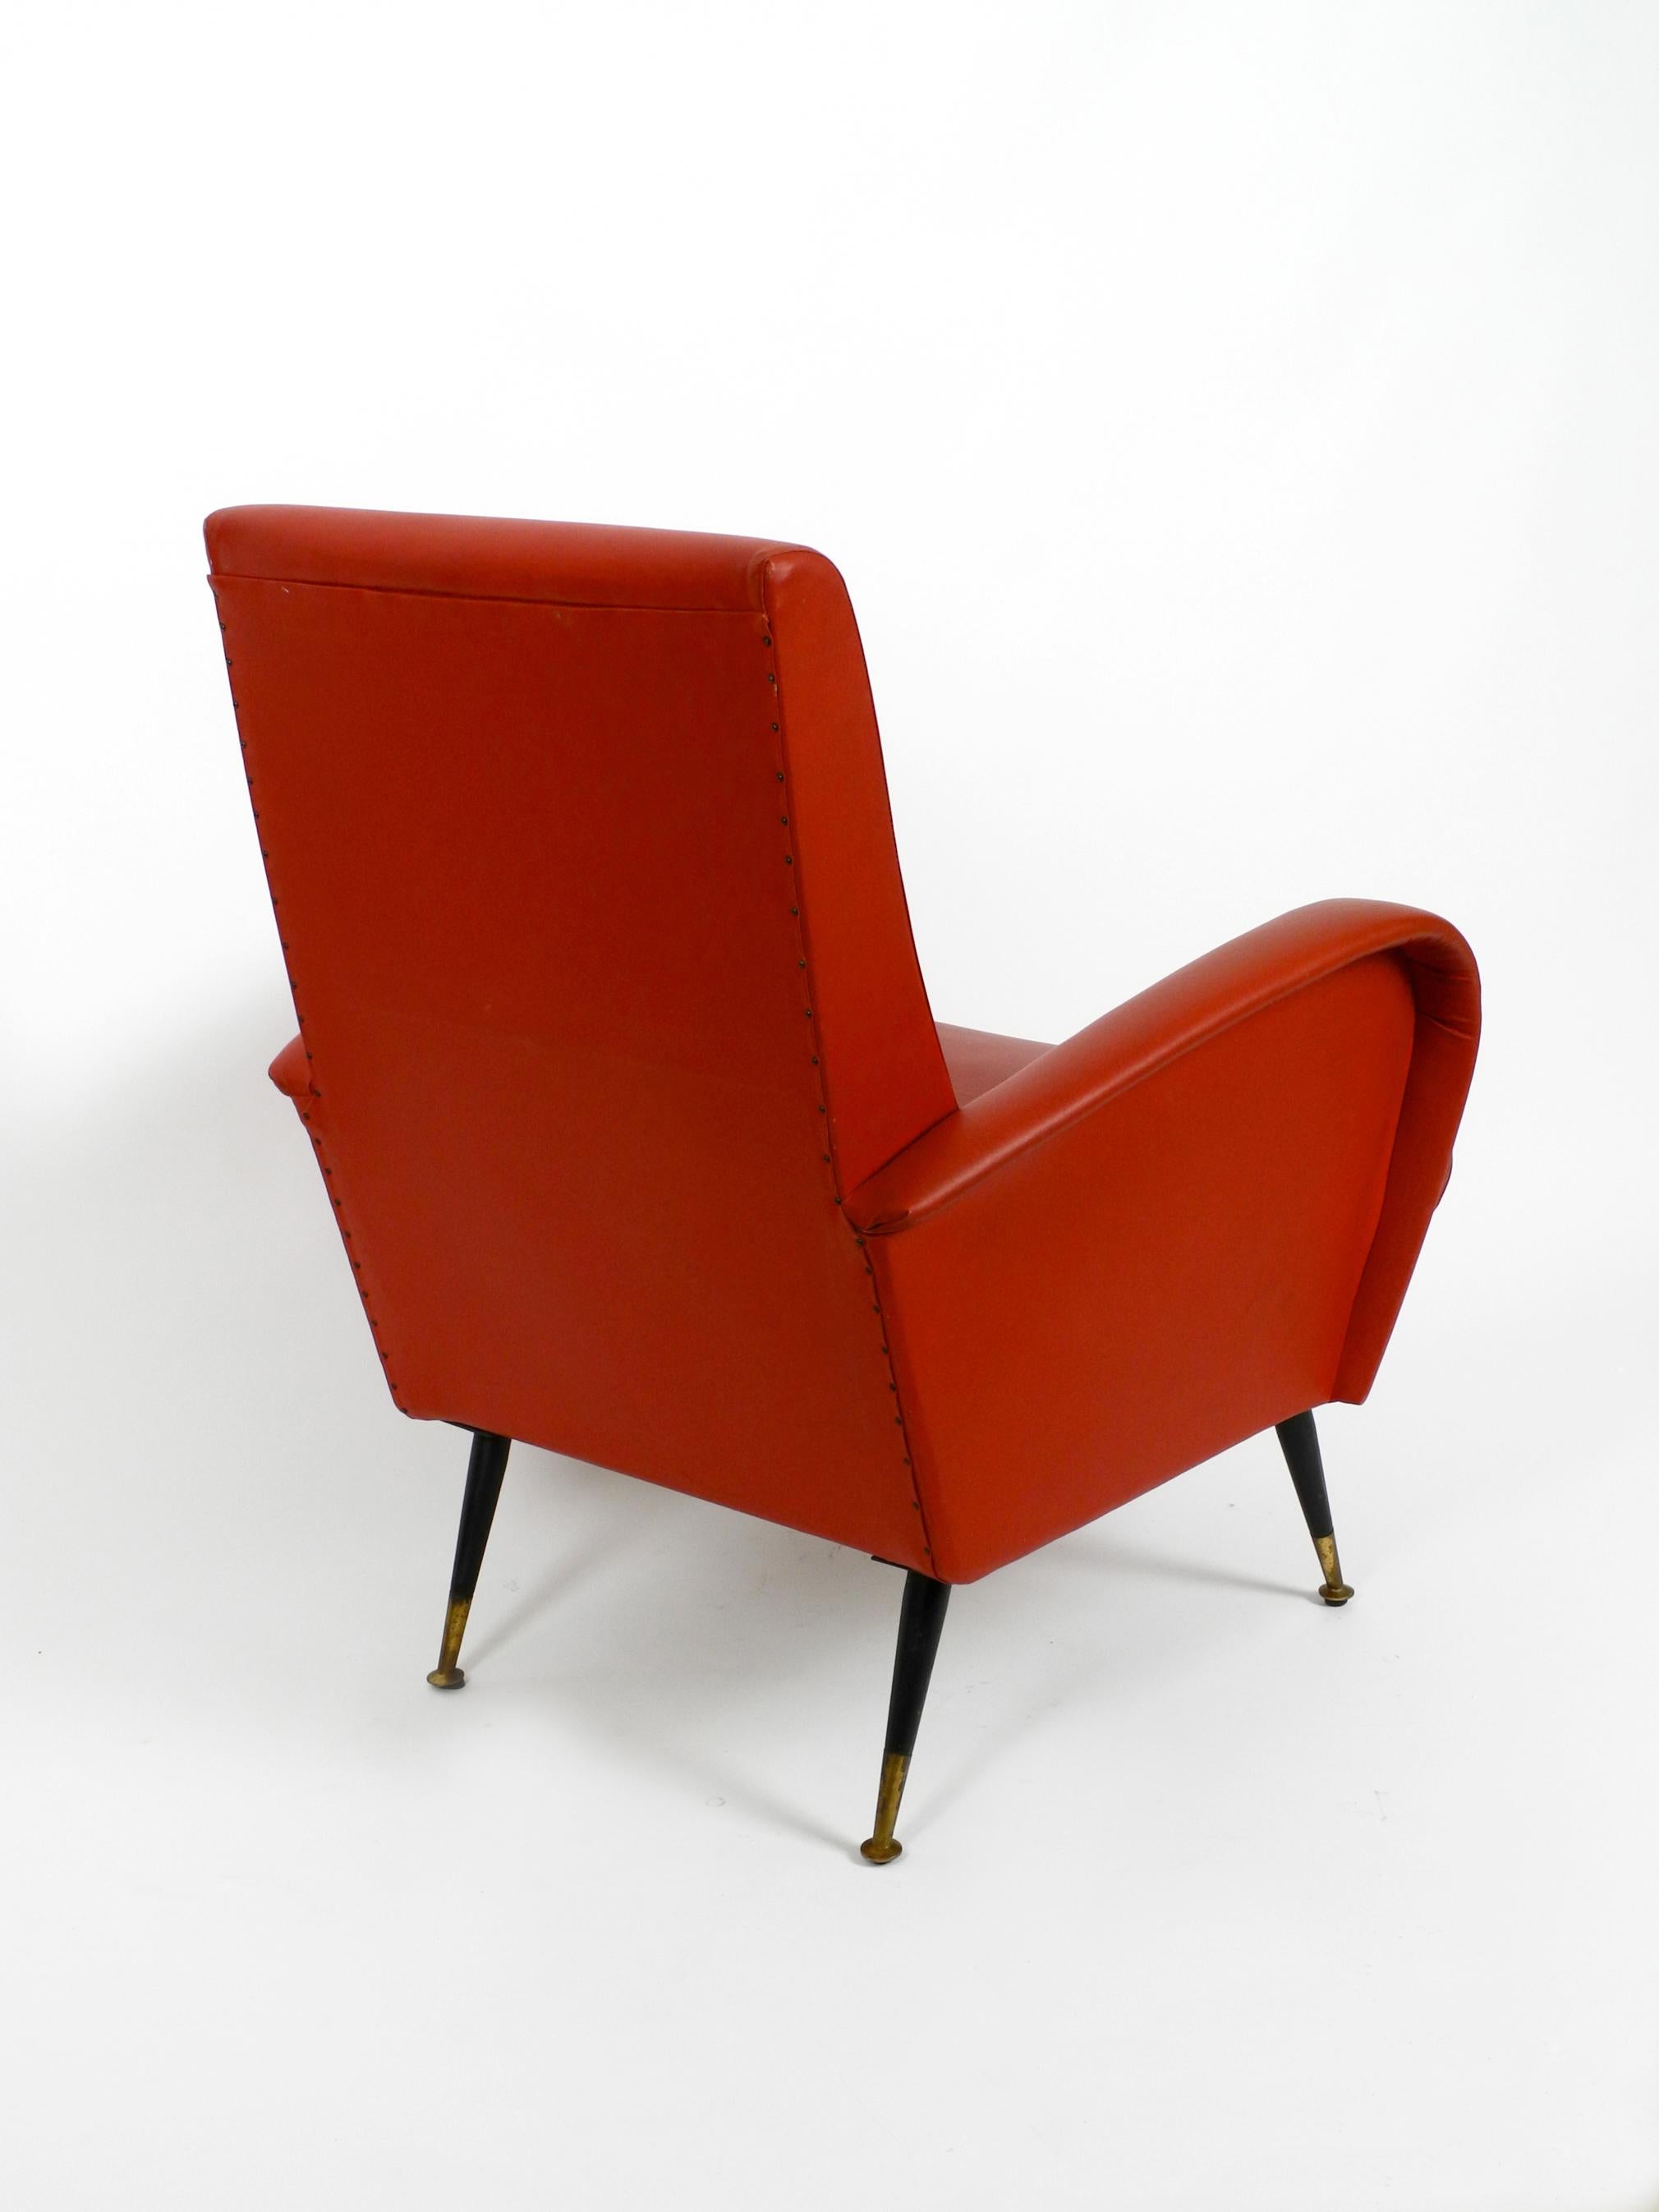 Mid-Century Modern Italian Midcentury Lounge Chair with Red Original Faux Leather Cover